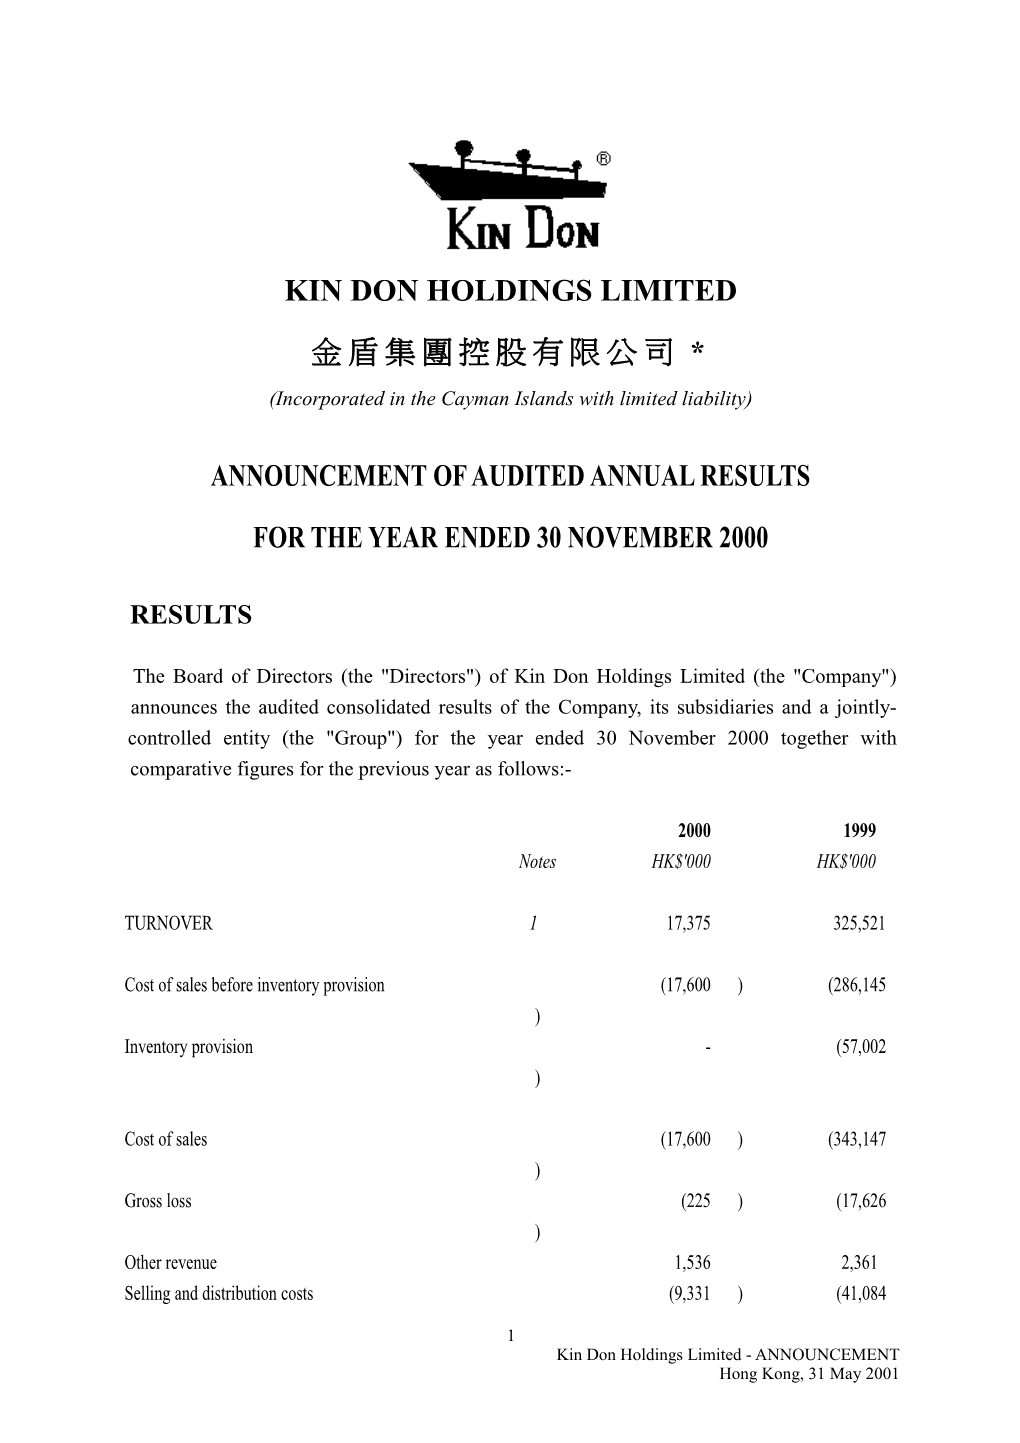 KIN DON HOLD 0208 - Results Announcement